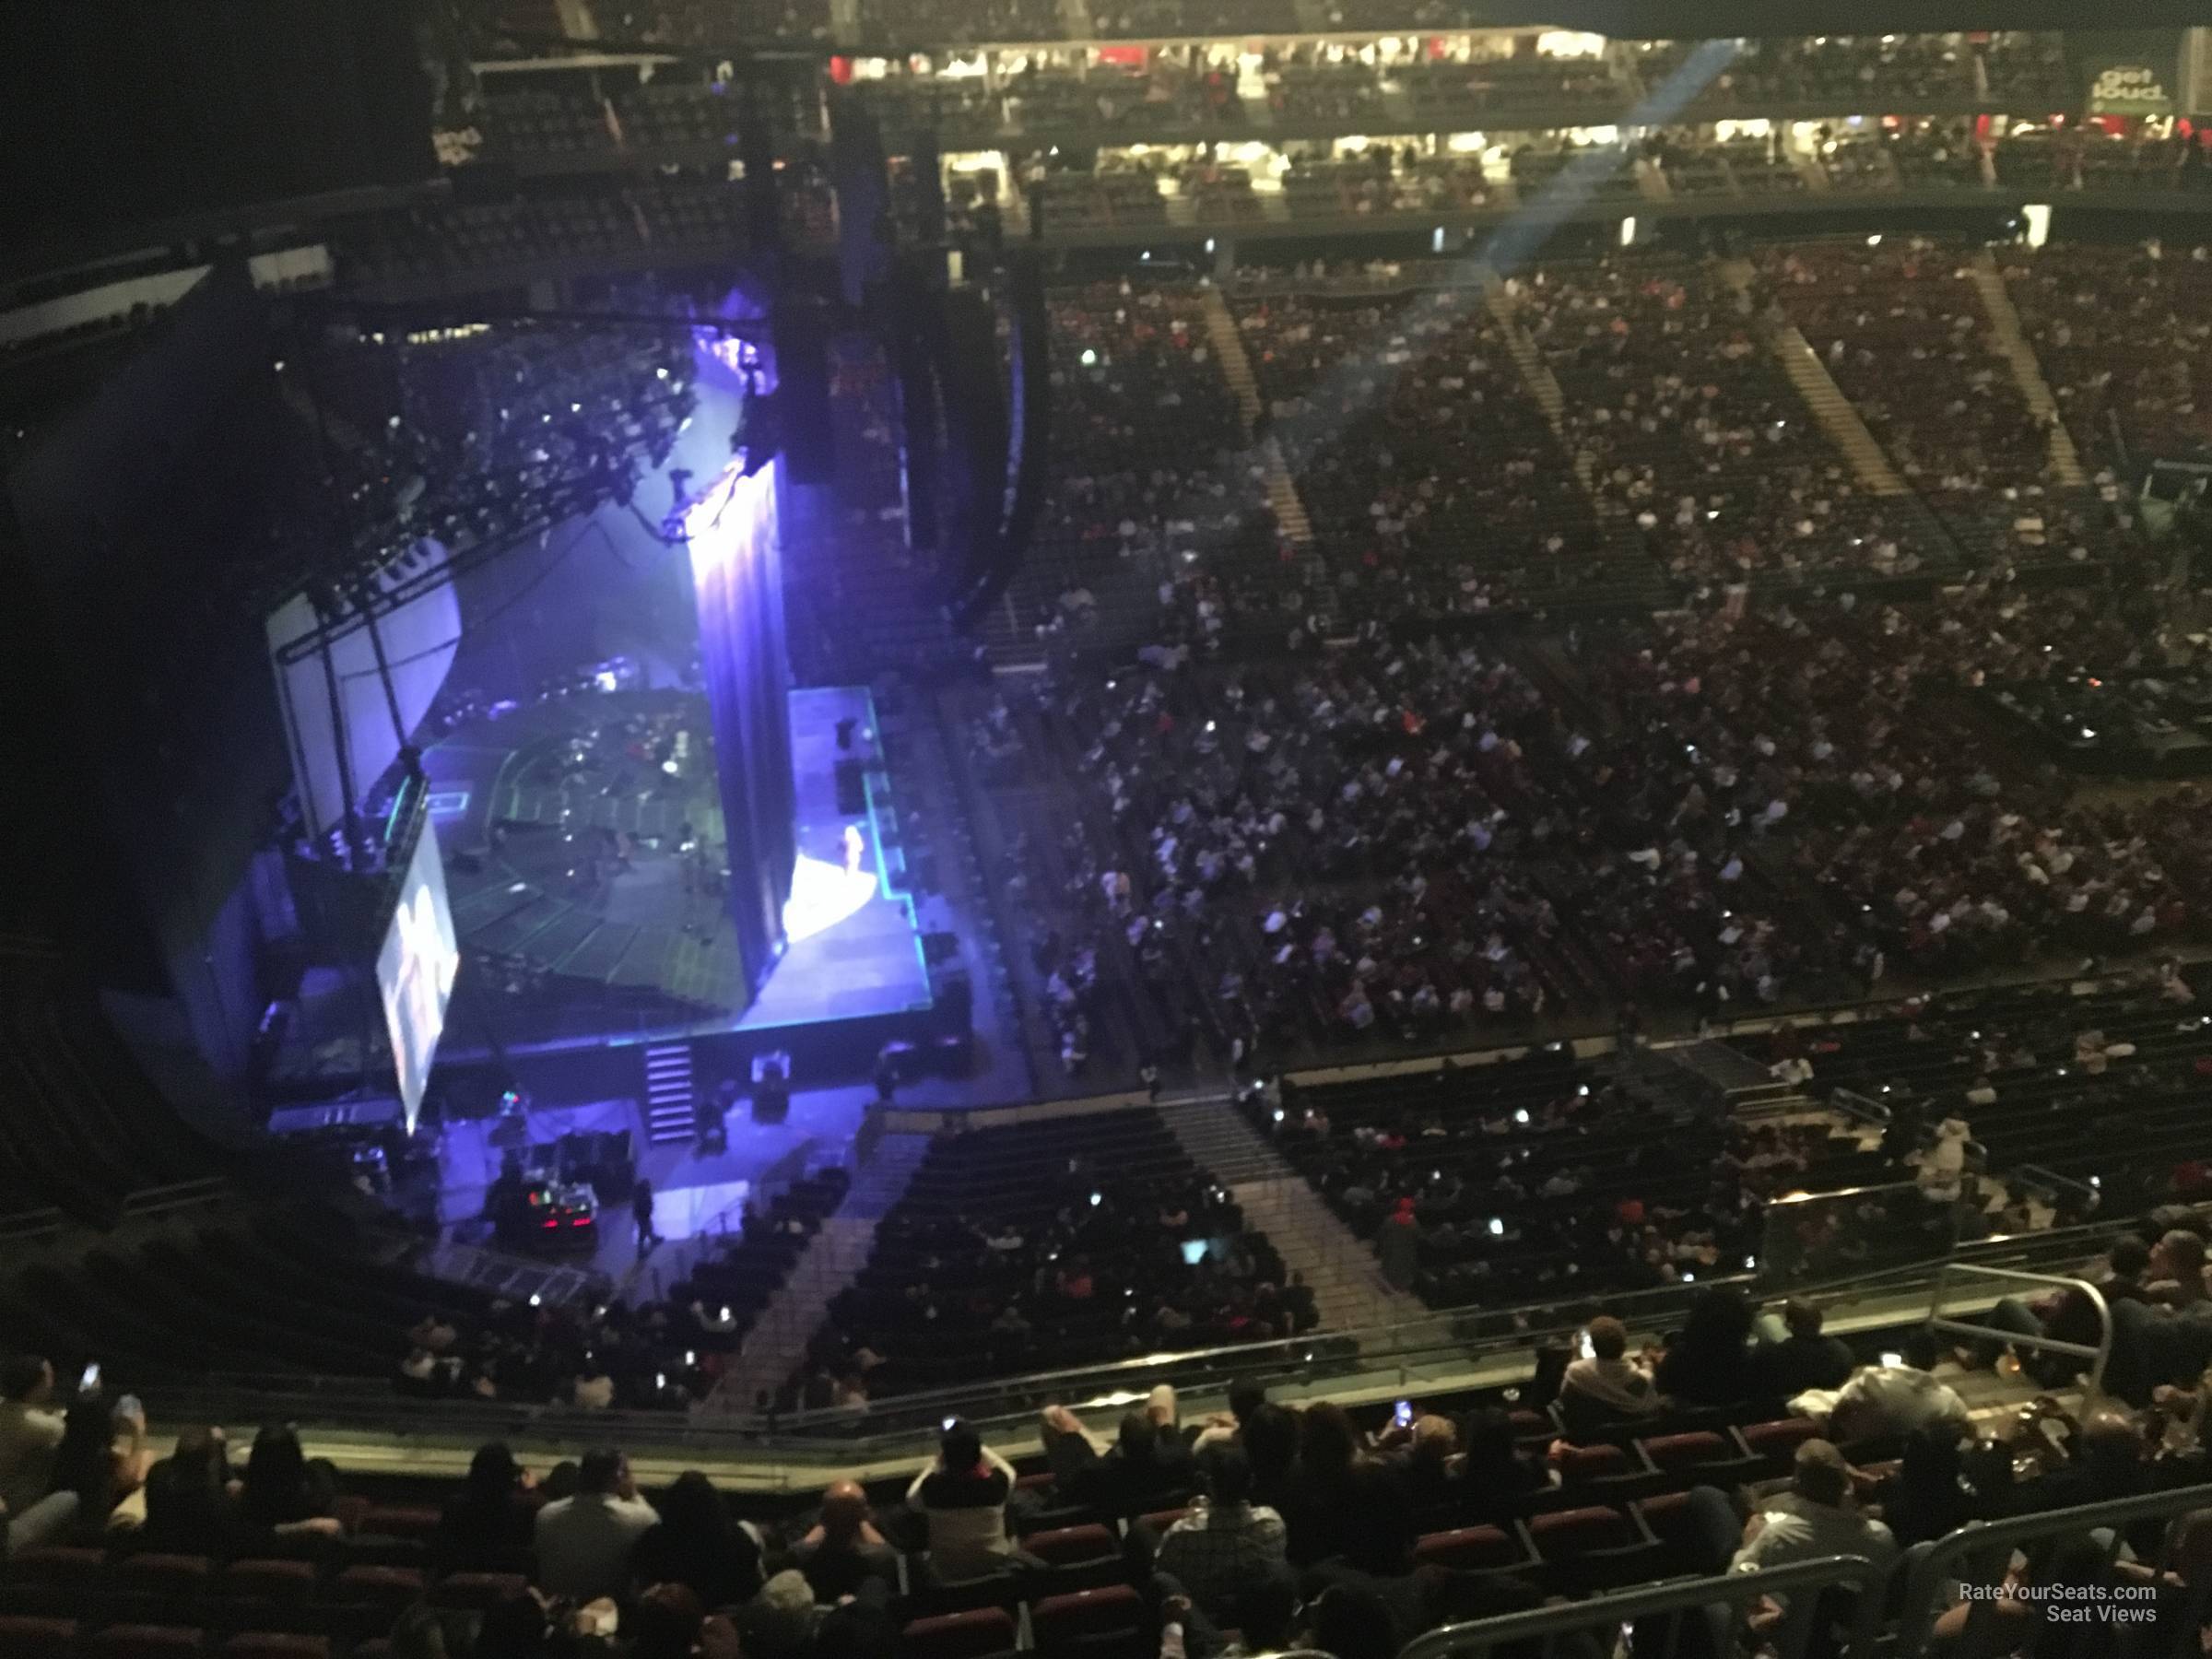 section 227, row 4 seat view  for concert - prudential center